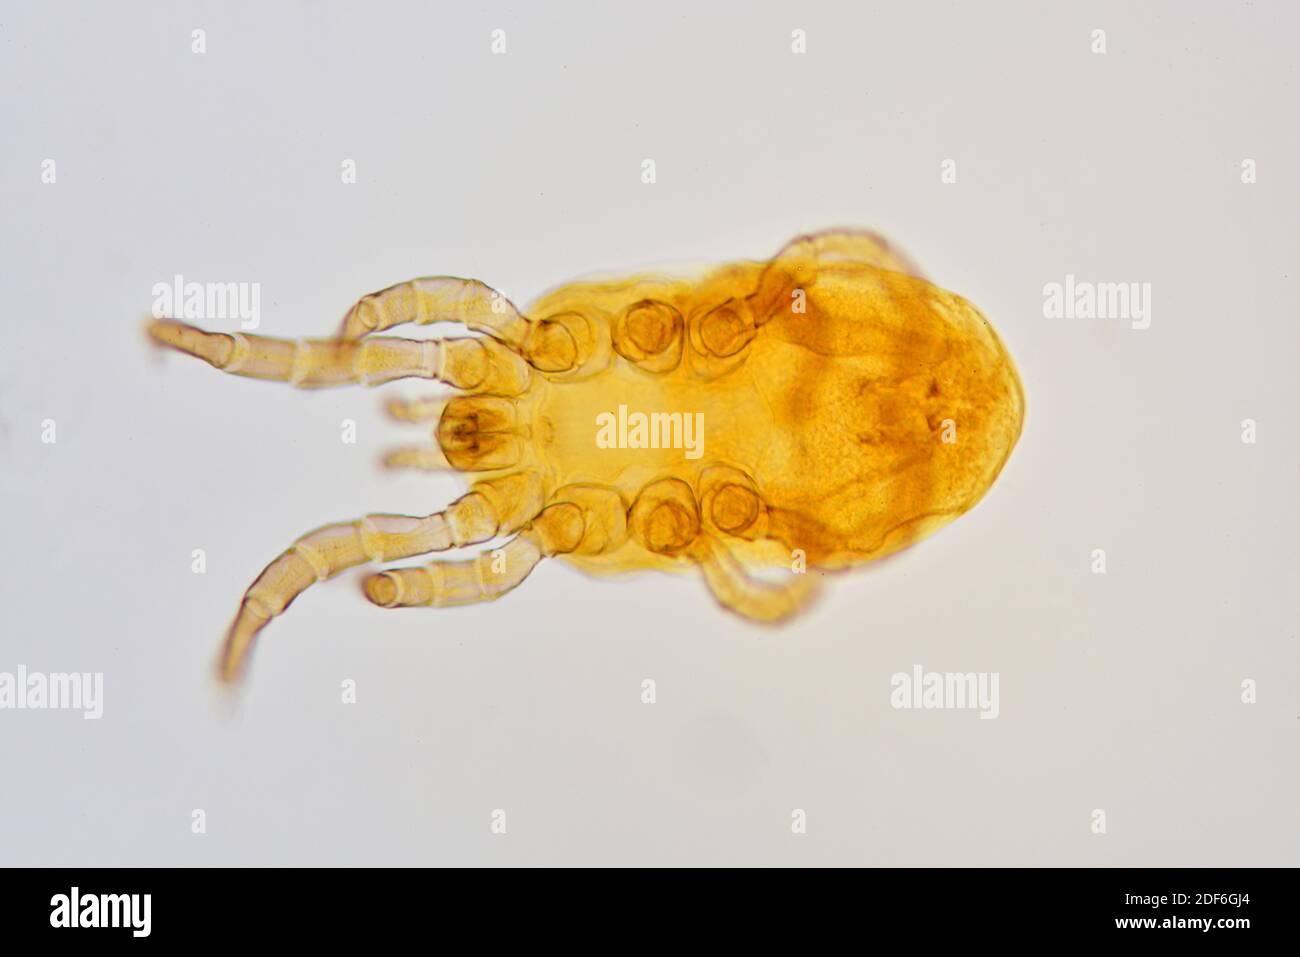 Chiken red mite (Dermanyssus gallinae) is an hematophagous ectoparasite of birds. Optical microscope X100. Stock Photo